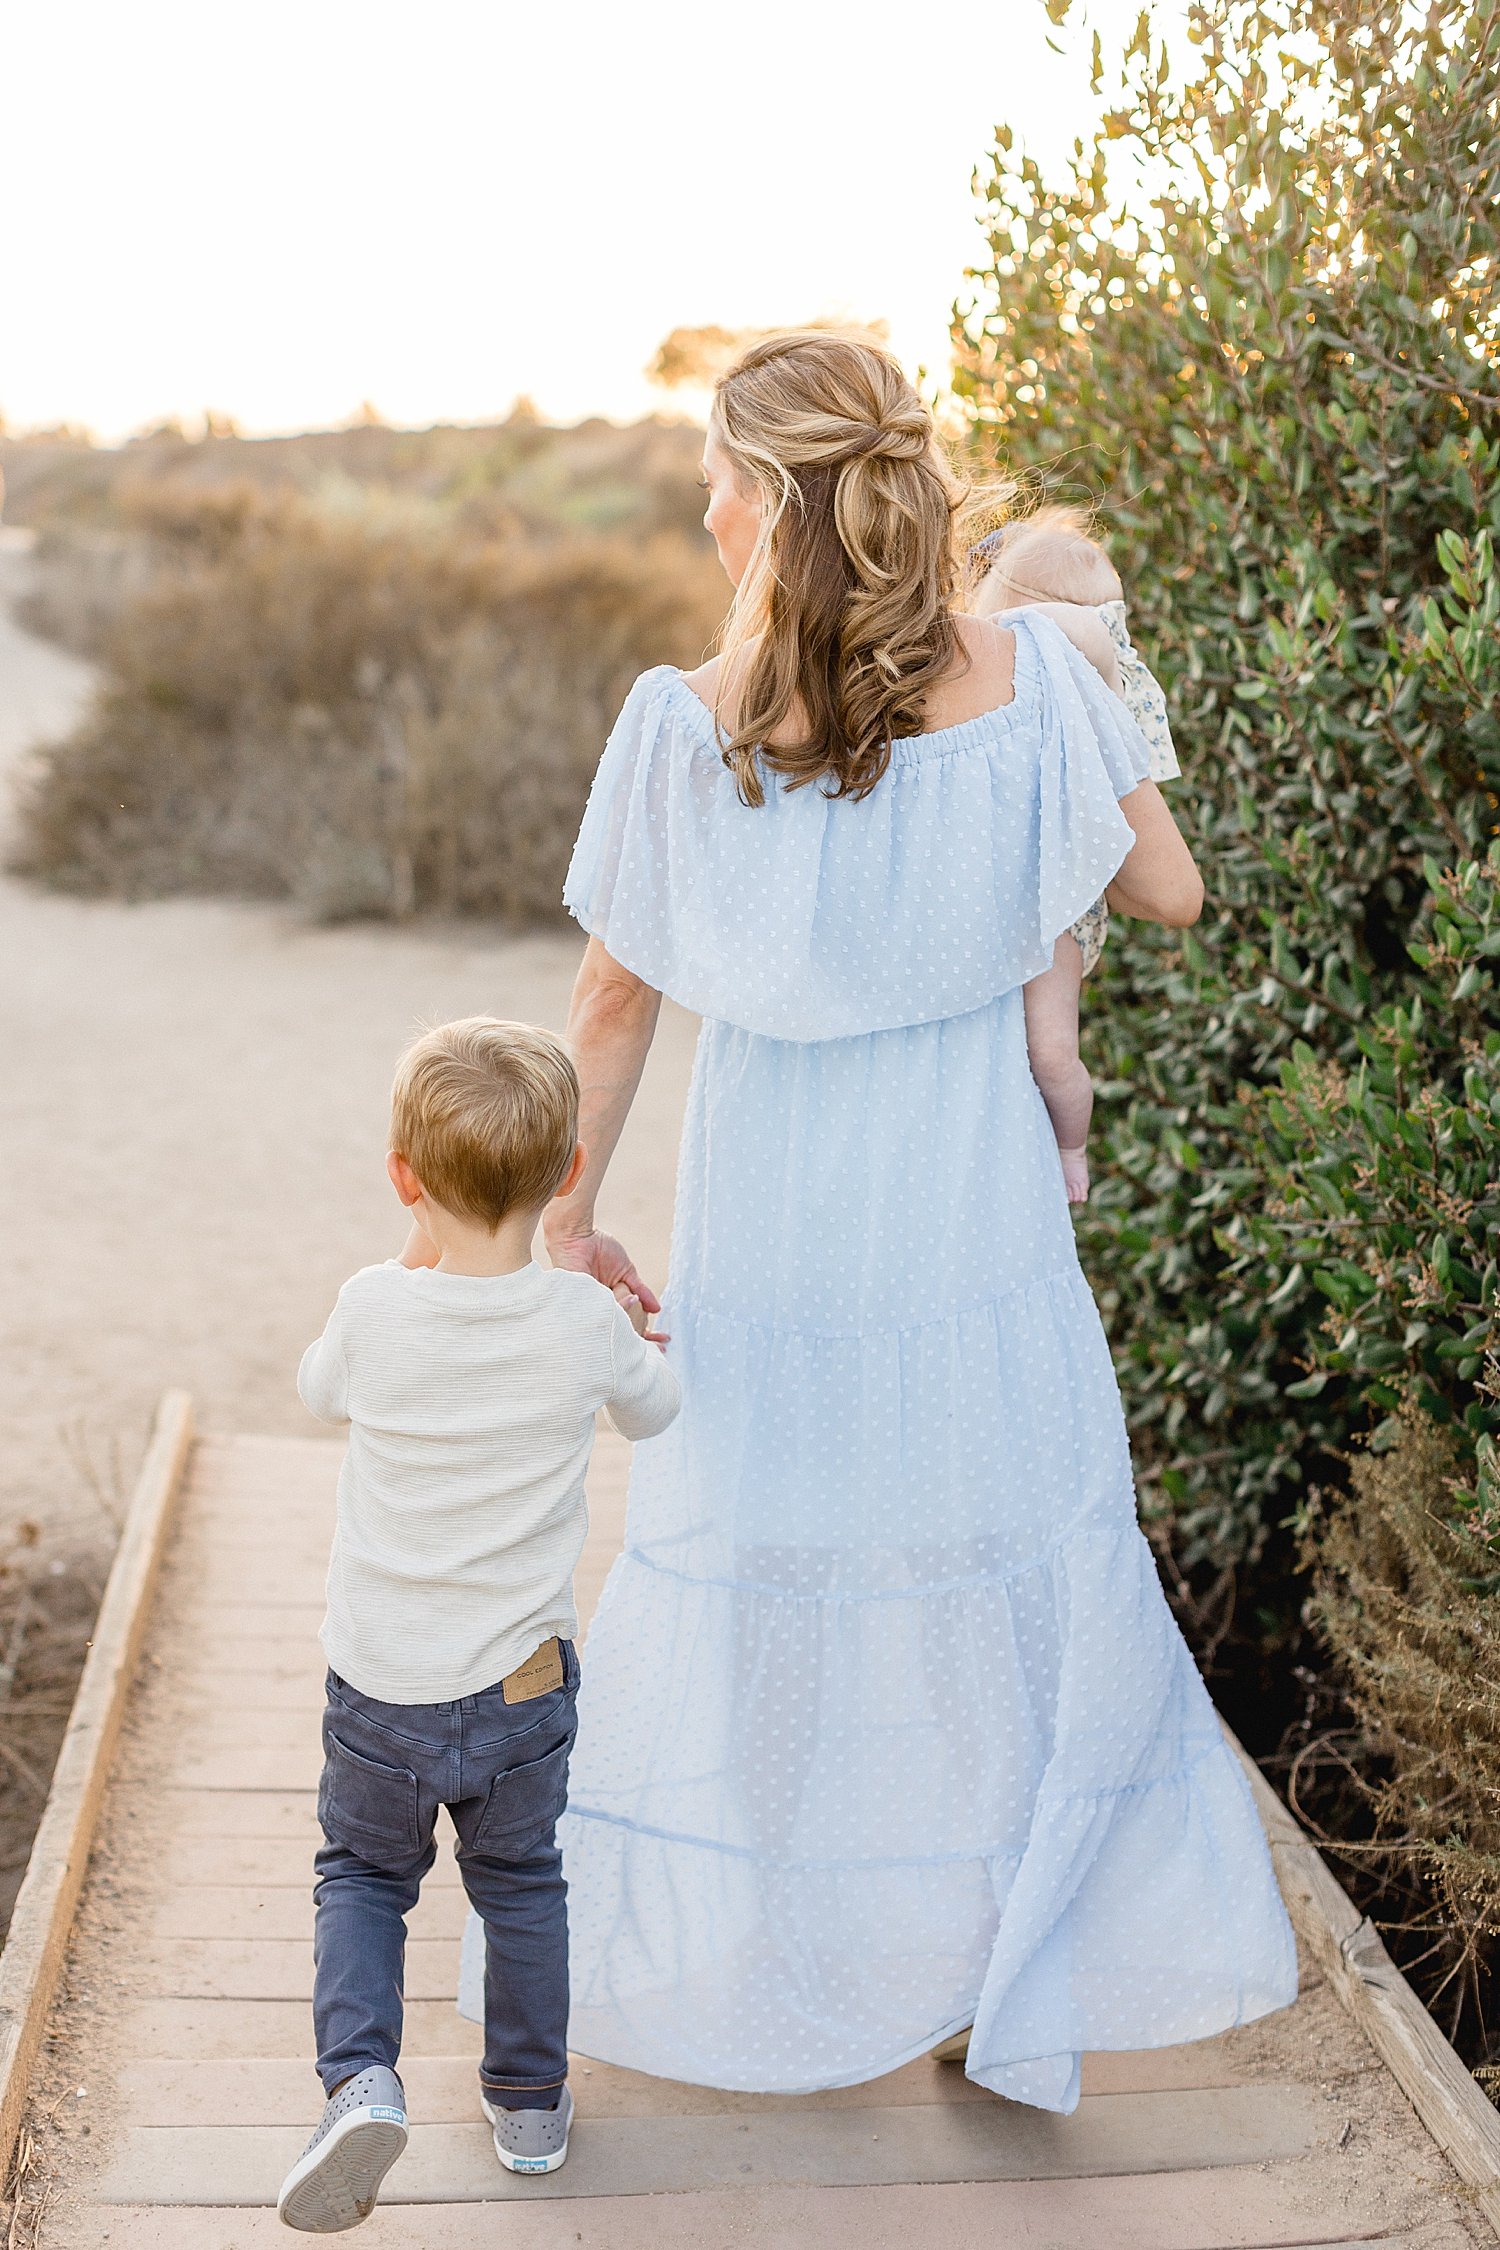 Mom walking into sunset with son and daughter | Ambre Williams Photography